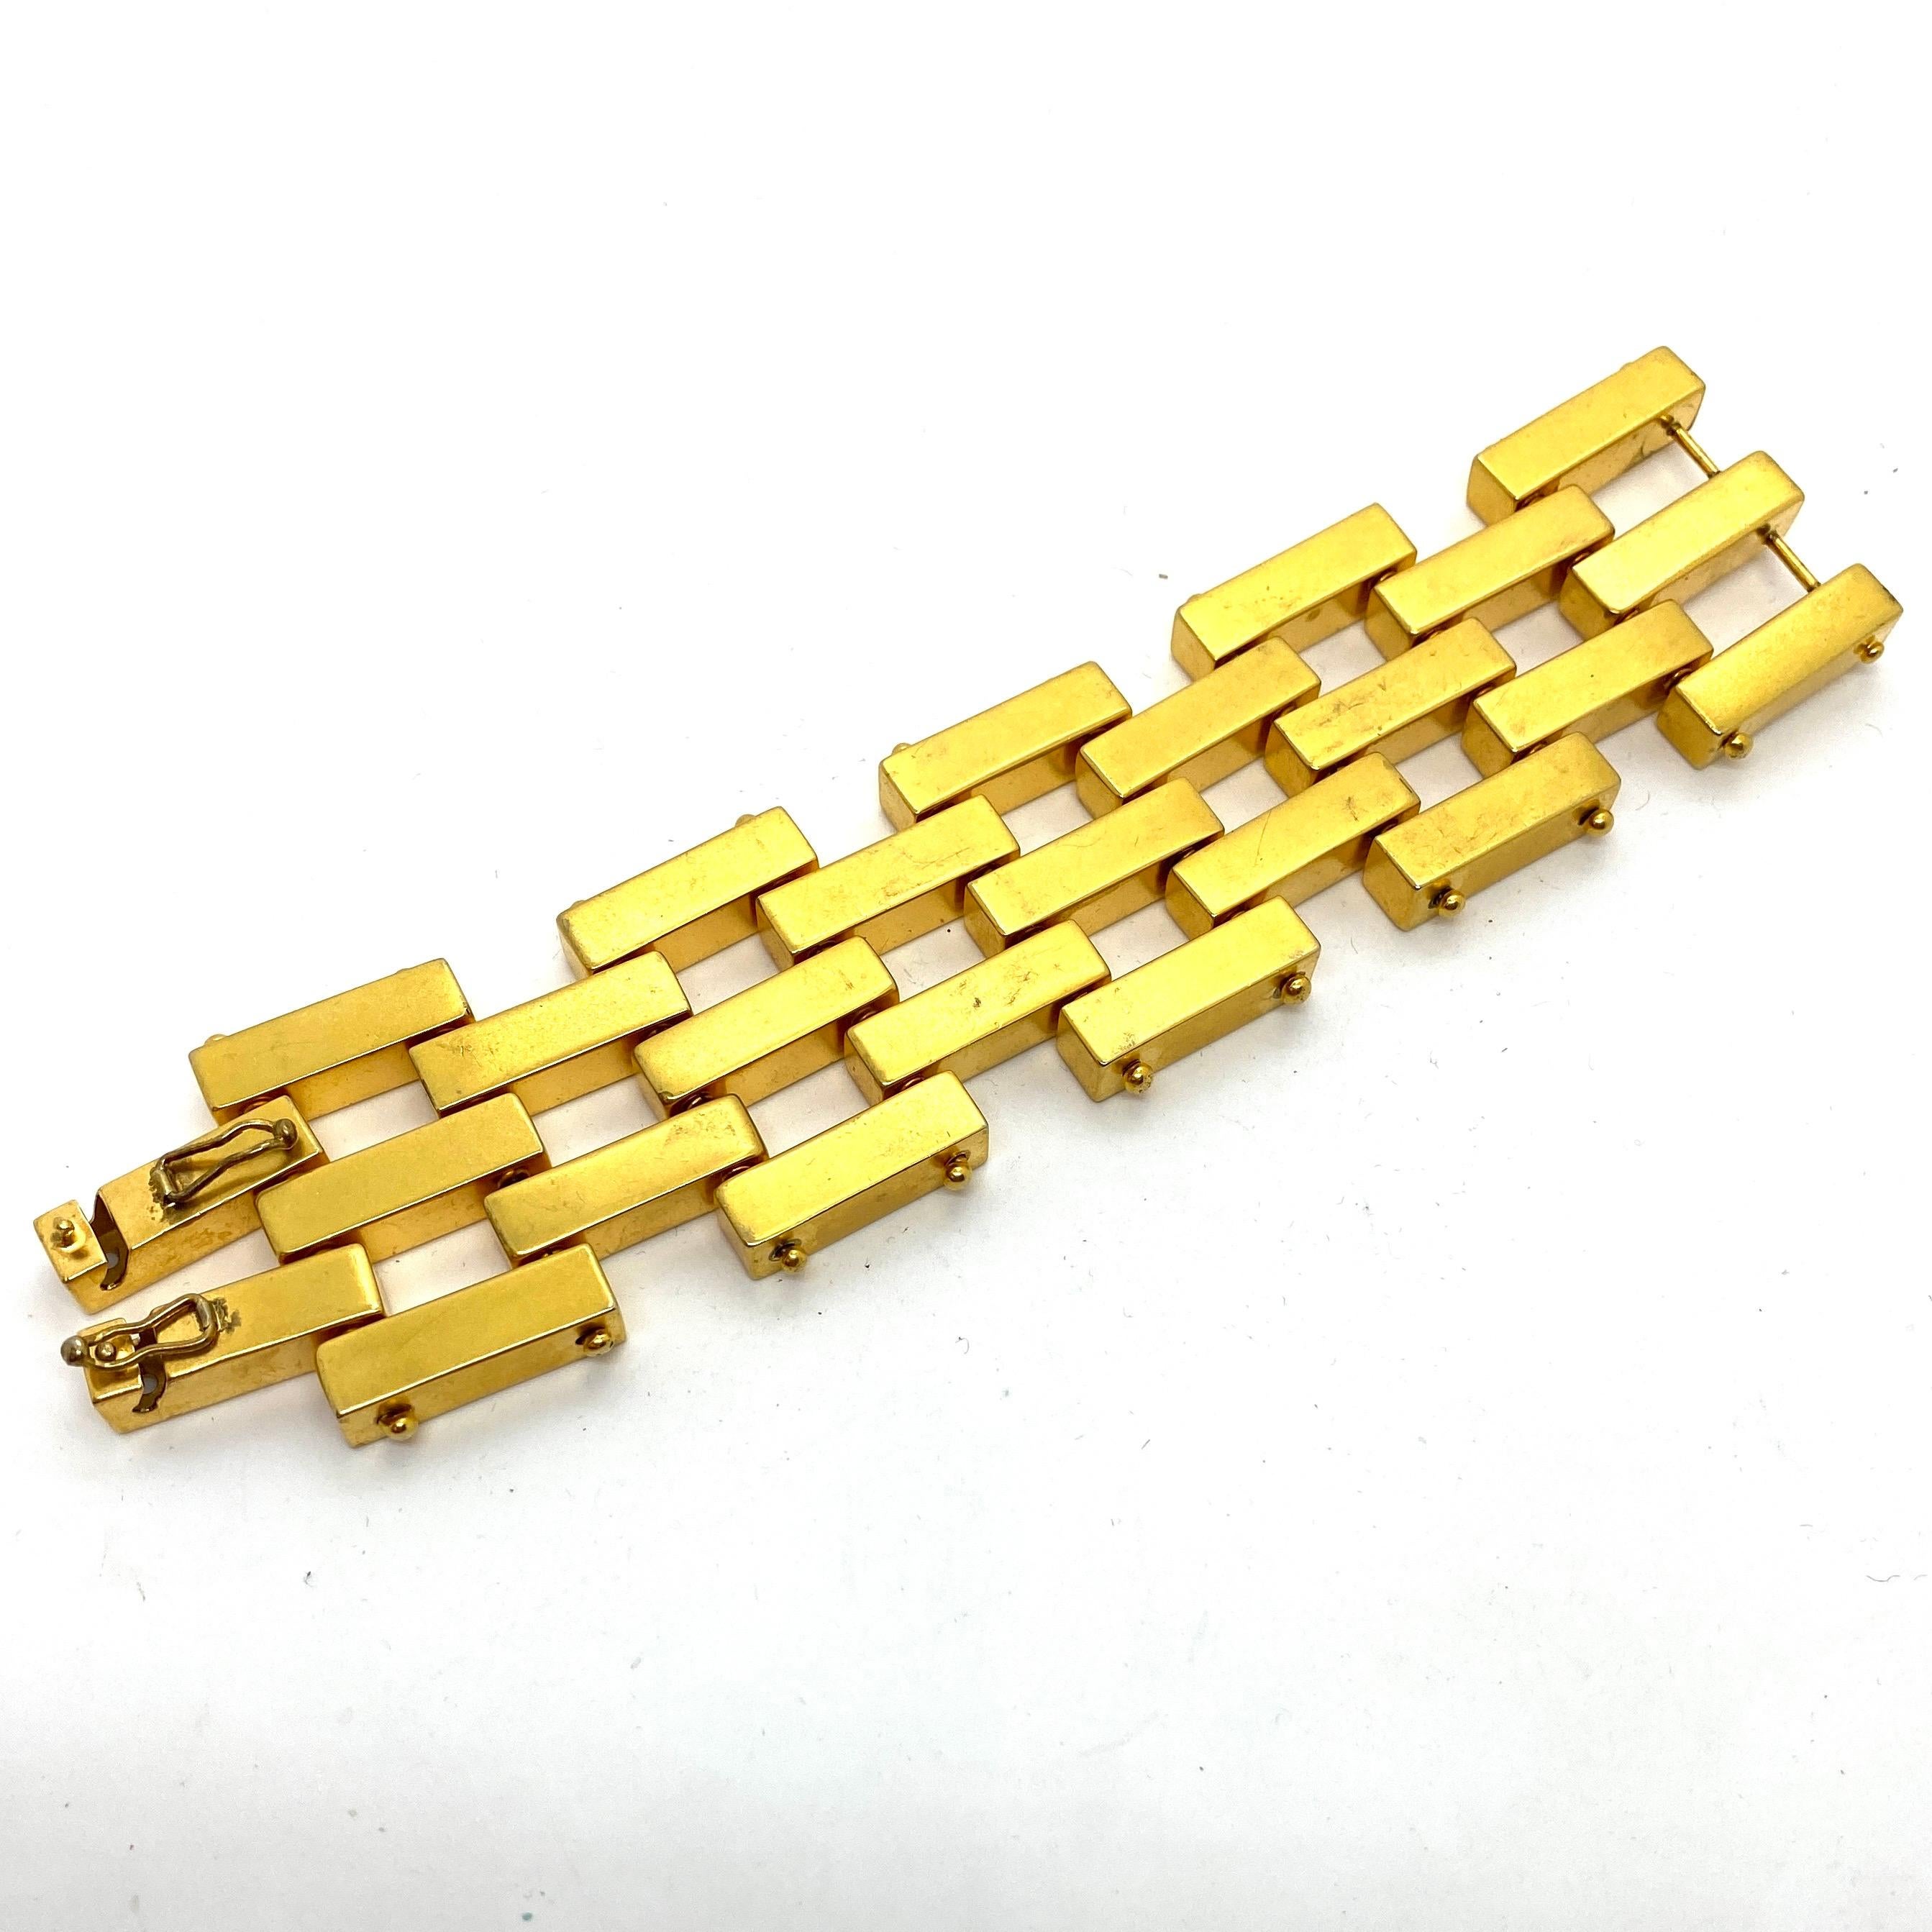 Robert Lee Morris makes sculptural art/fashion jewelry that is both sensually organic as well as architectural and engineered into liquid geometry. This is a classic 2x3 row Bar bracelet, matte gold plated brass and composed of individual hollow